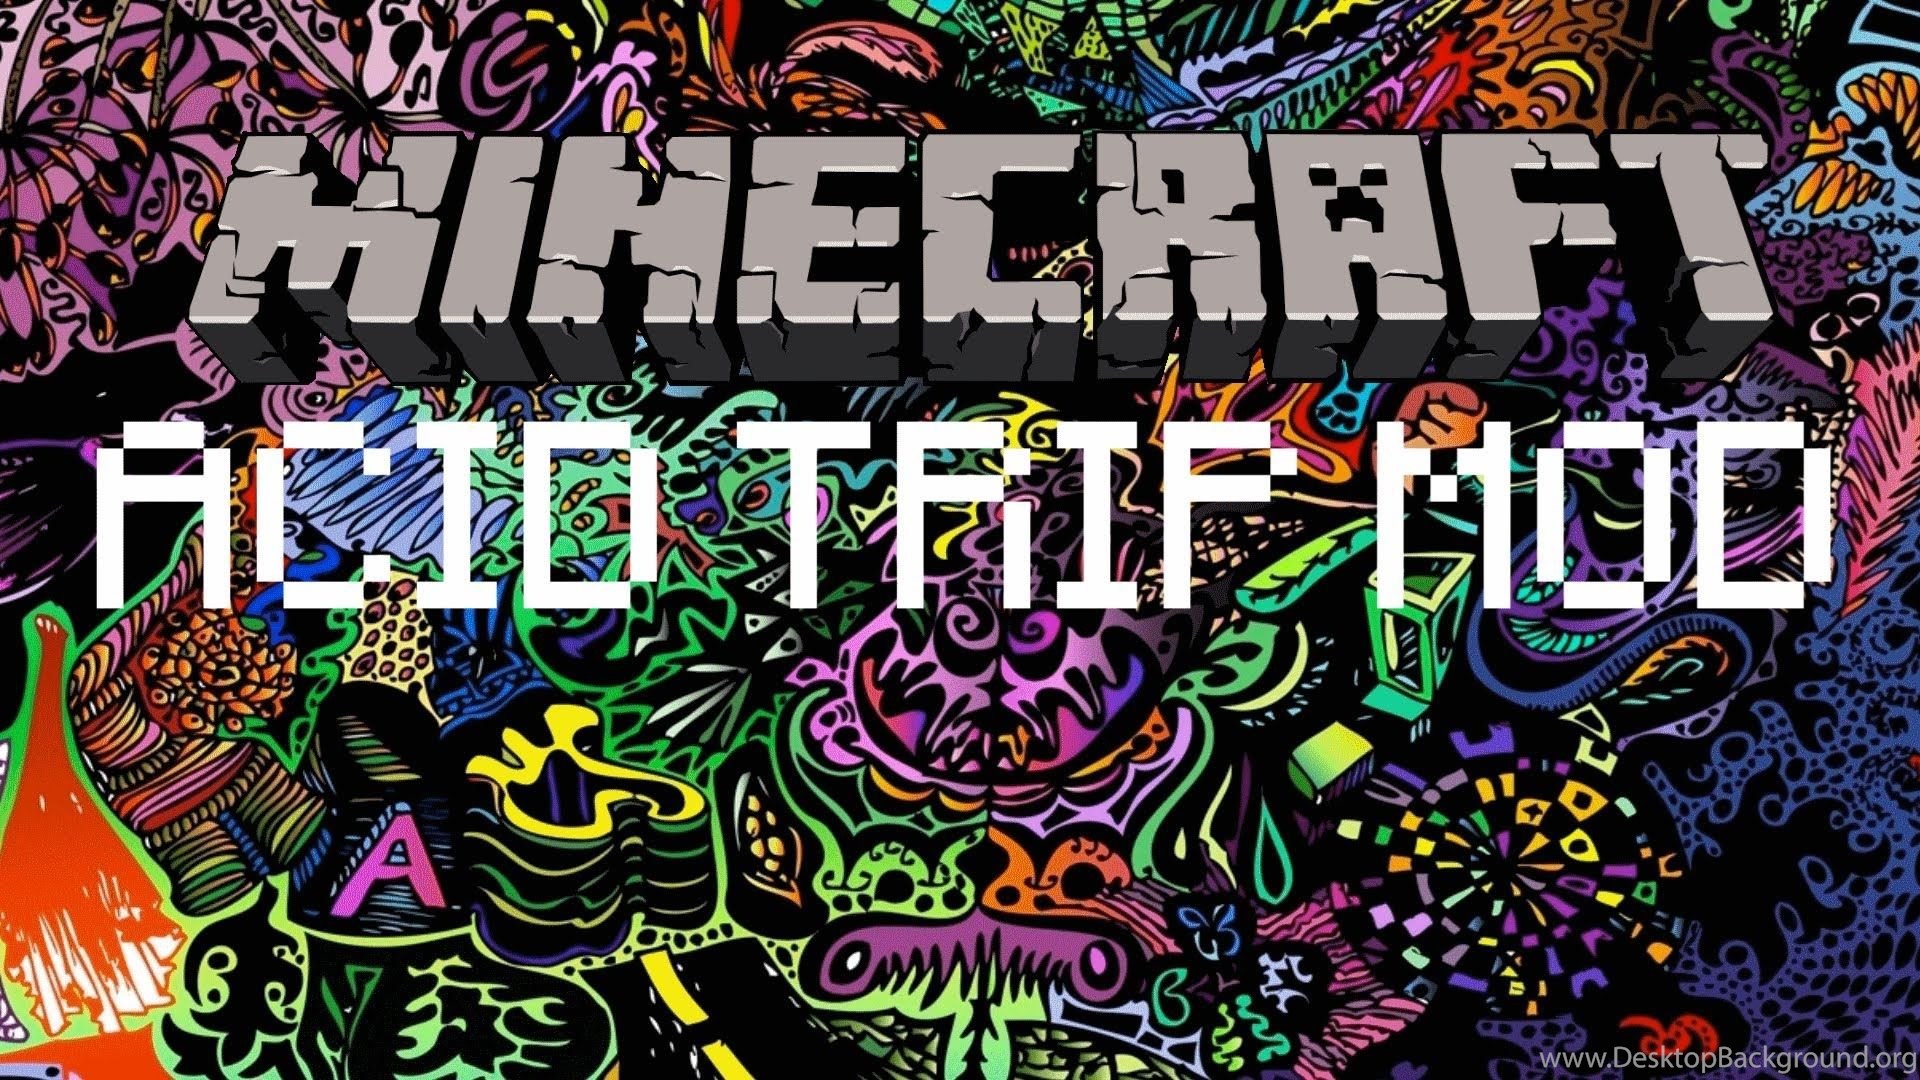 Minecraft Acid Trip Shader And Sonic Ether S Unbelievable Shader Images, Photos, Reviews